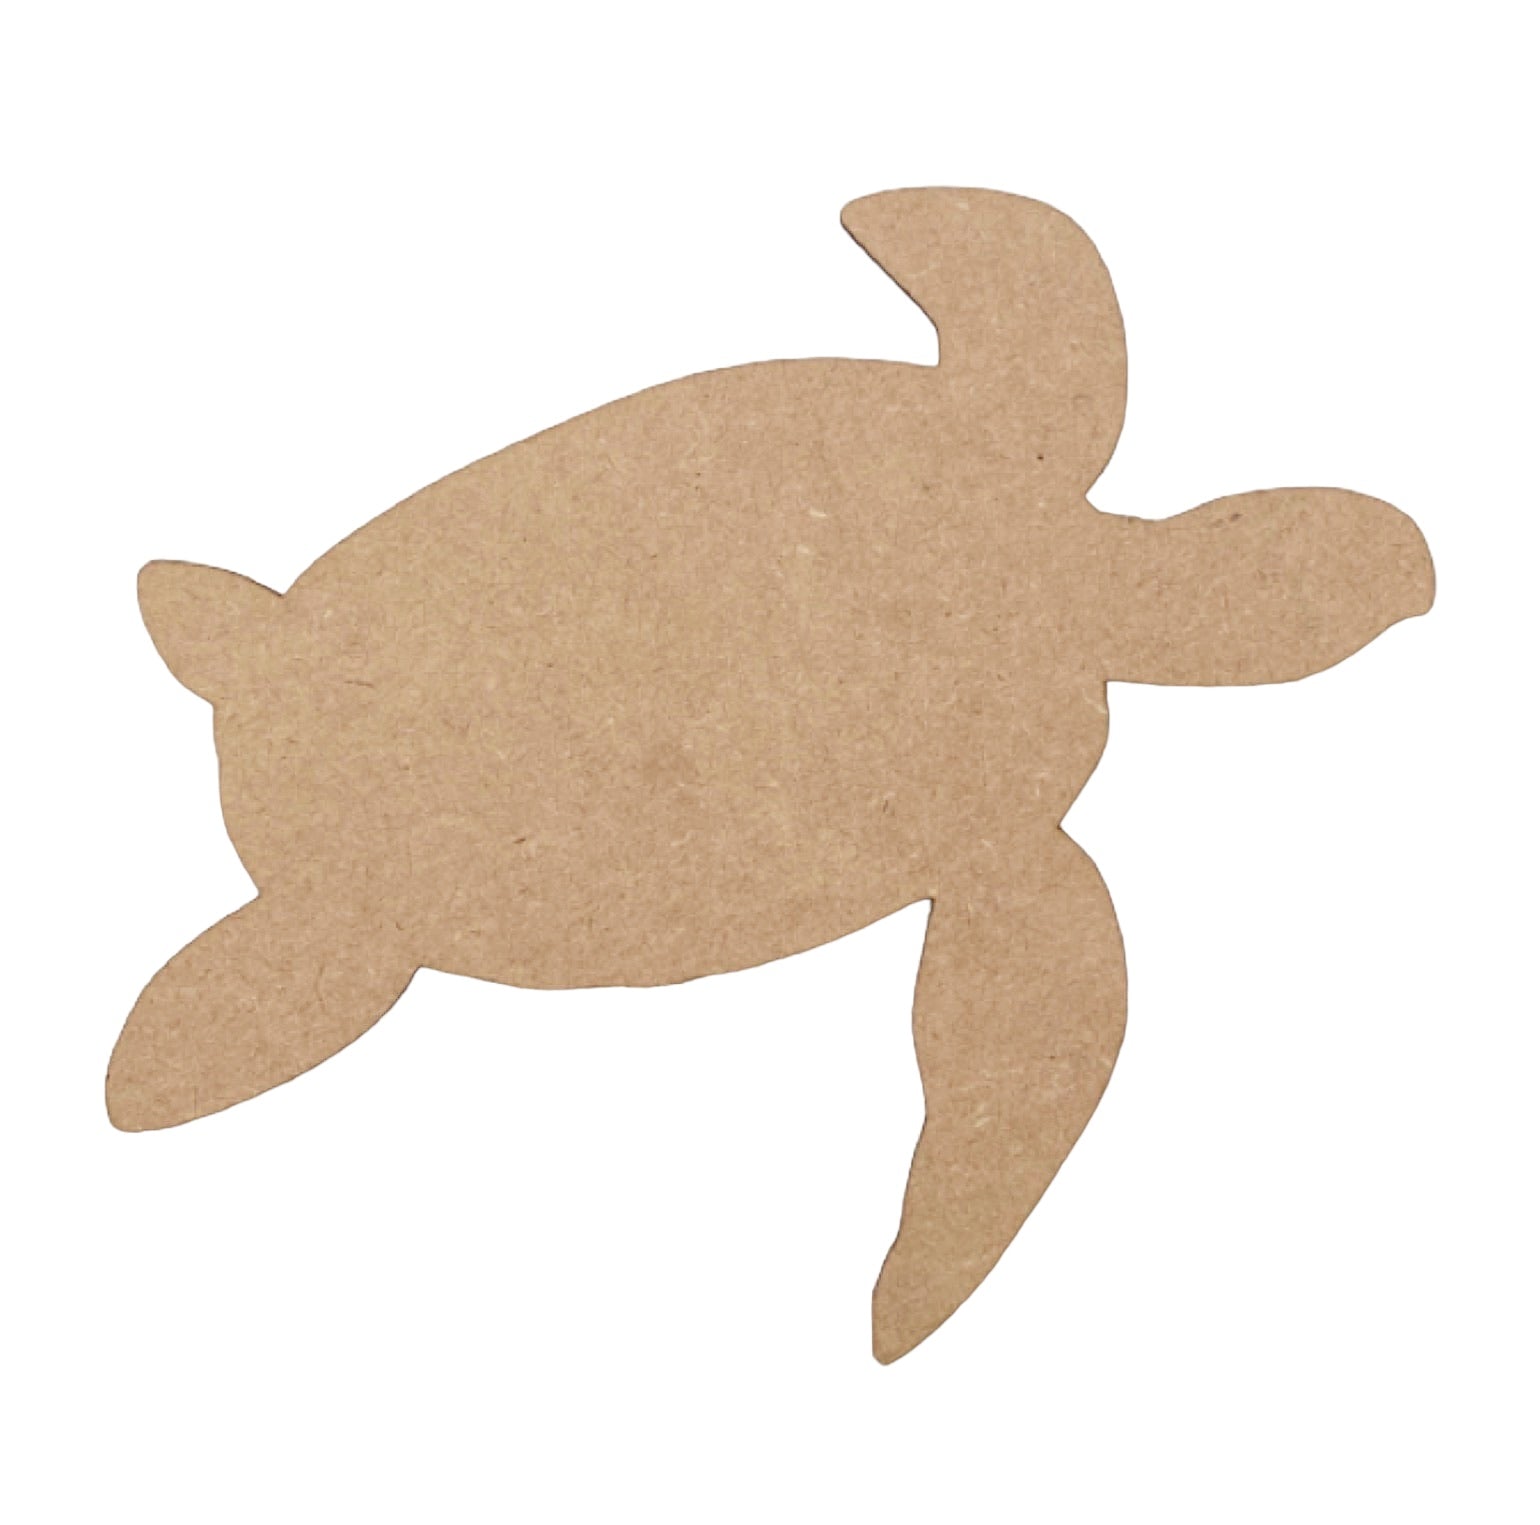 Turtle Raw MDF Wooden DIY Craft - The Renmy Store Homewares & Gifts 